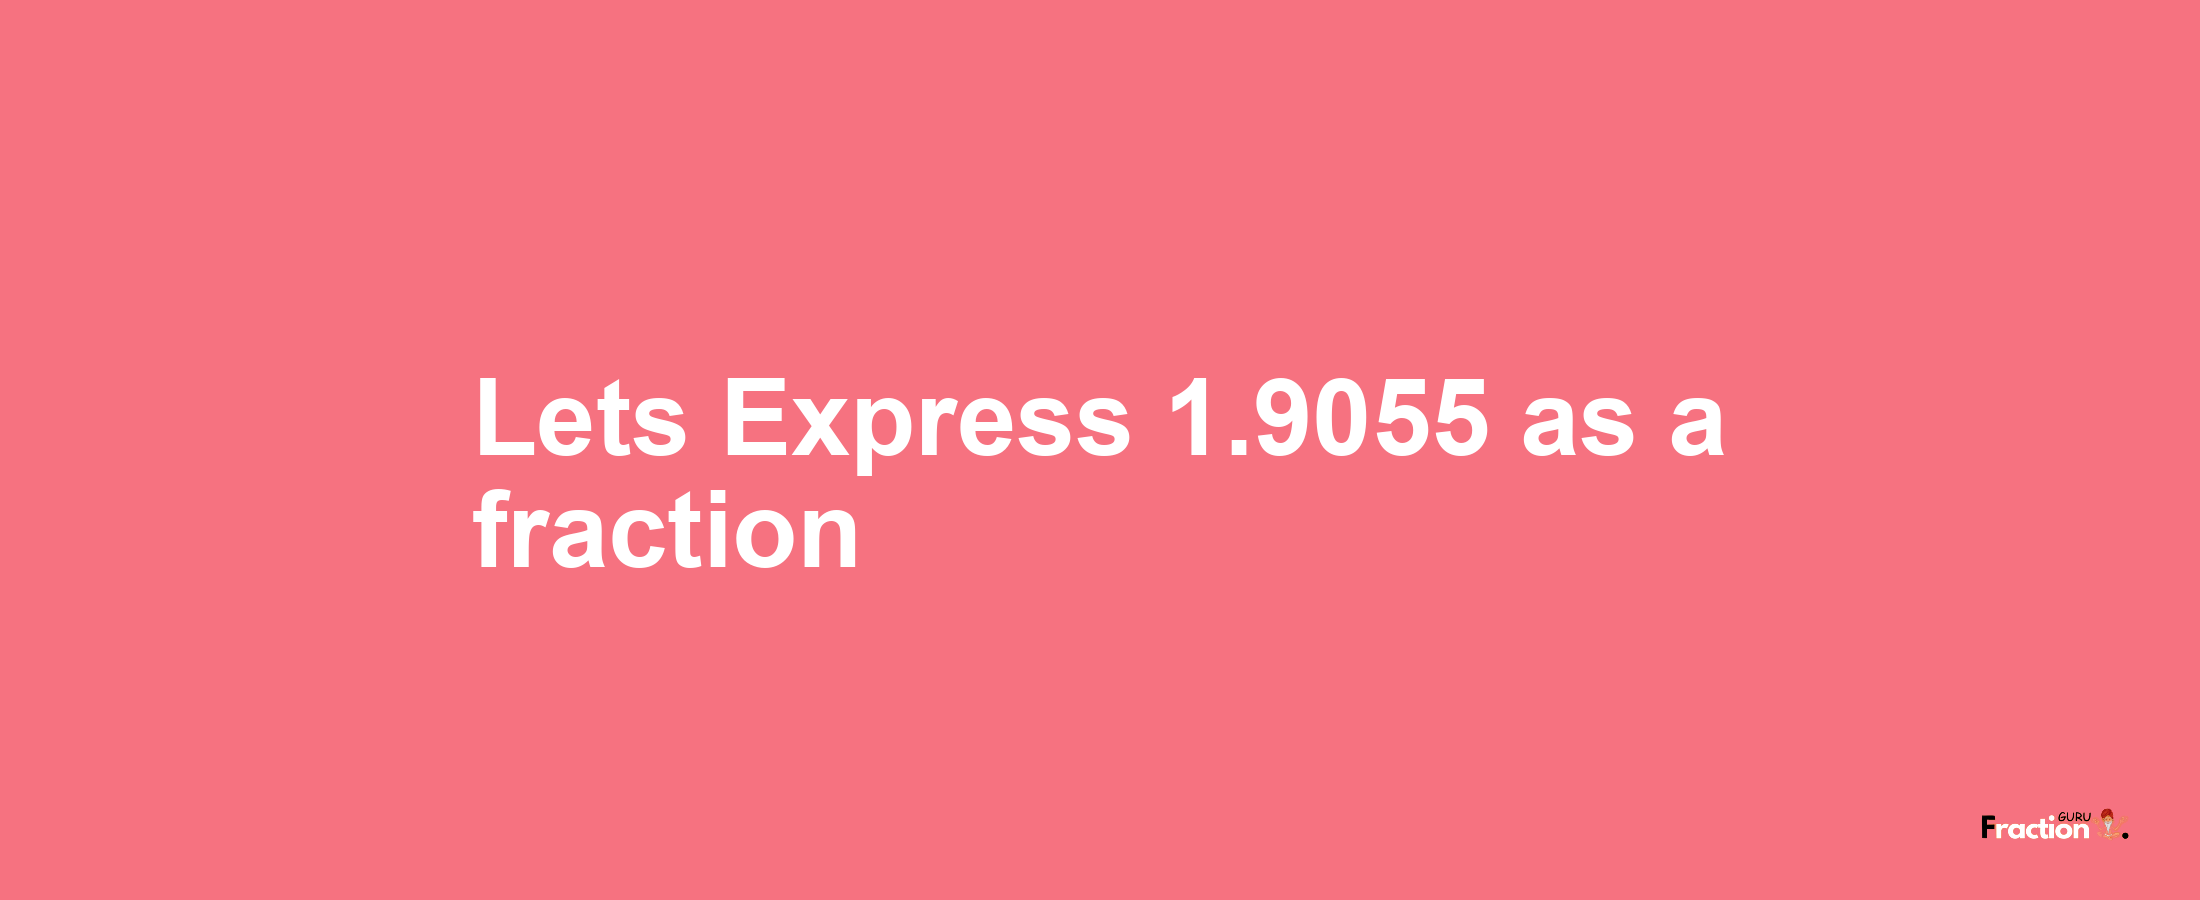 Lets Express 1.9055 as afraction